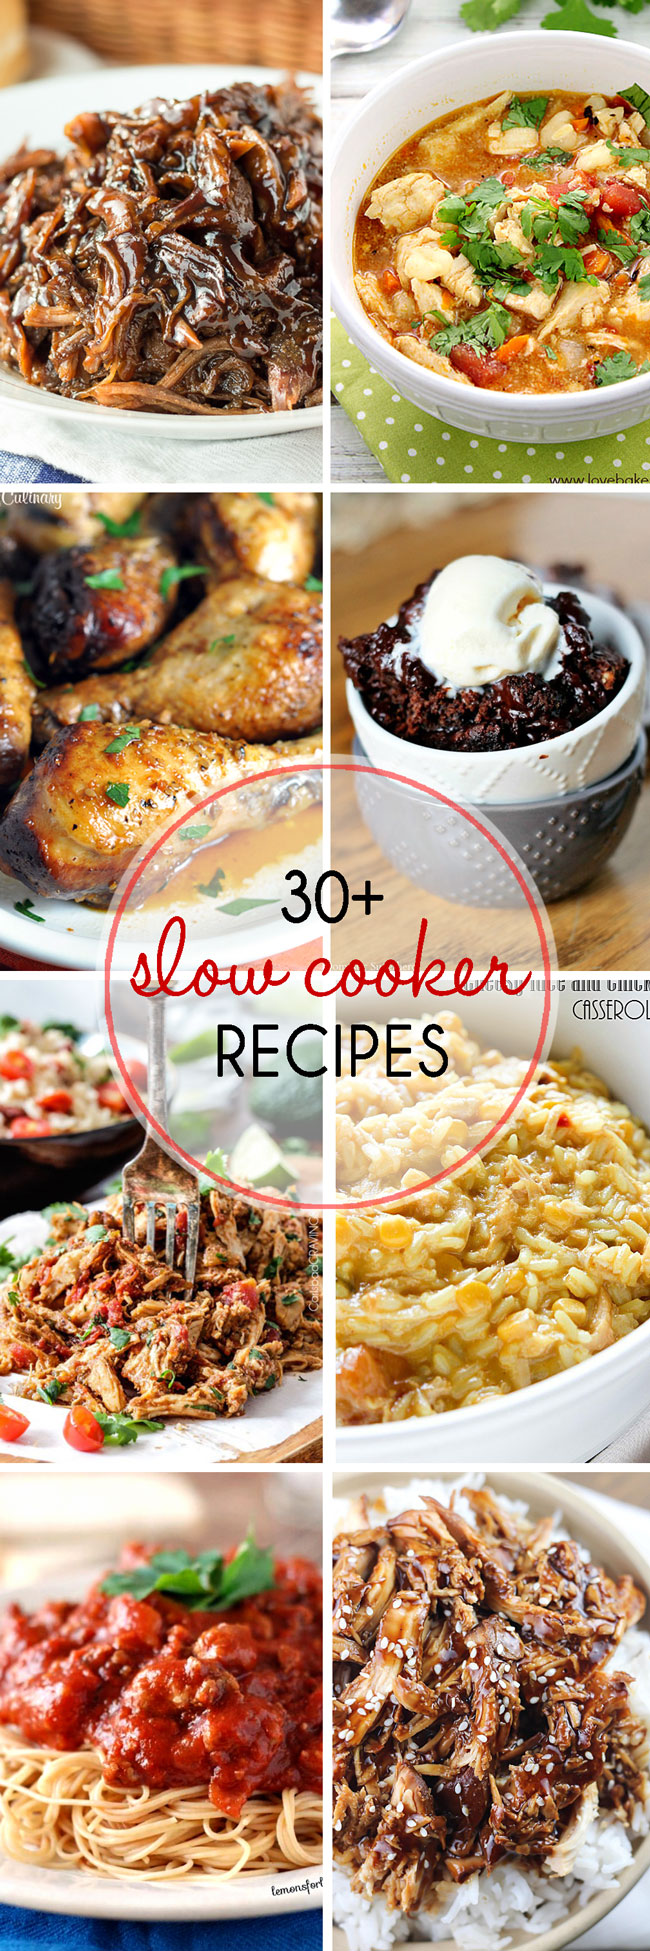 30+ Slow Cooker Recipes - So many fabulous dinner recipes to try and even a slow cooker dessert recipe! | The Love Nerds